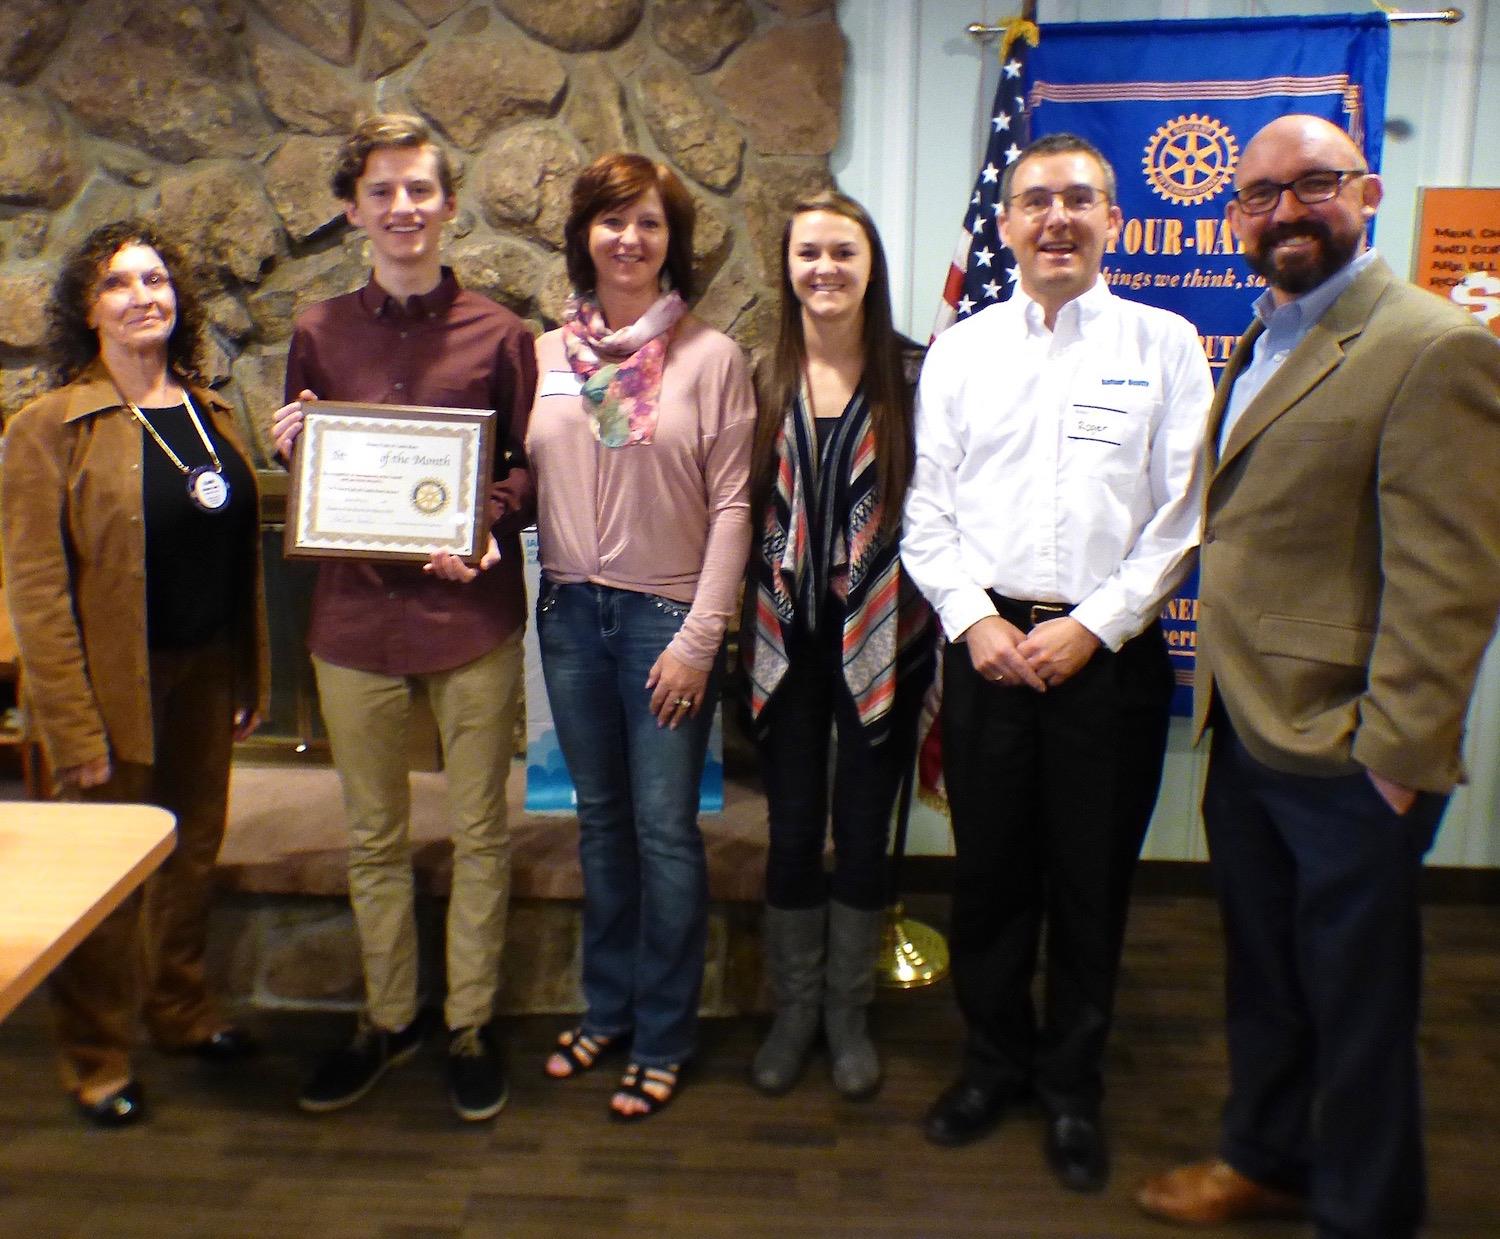 Zach Wilson Is Student Of Month For March Rotary Club Of Castle Rock